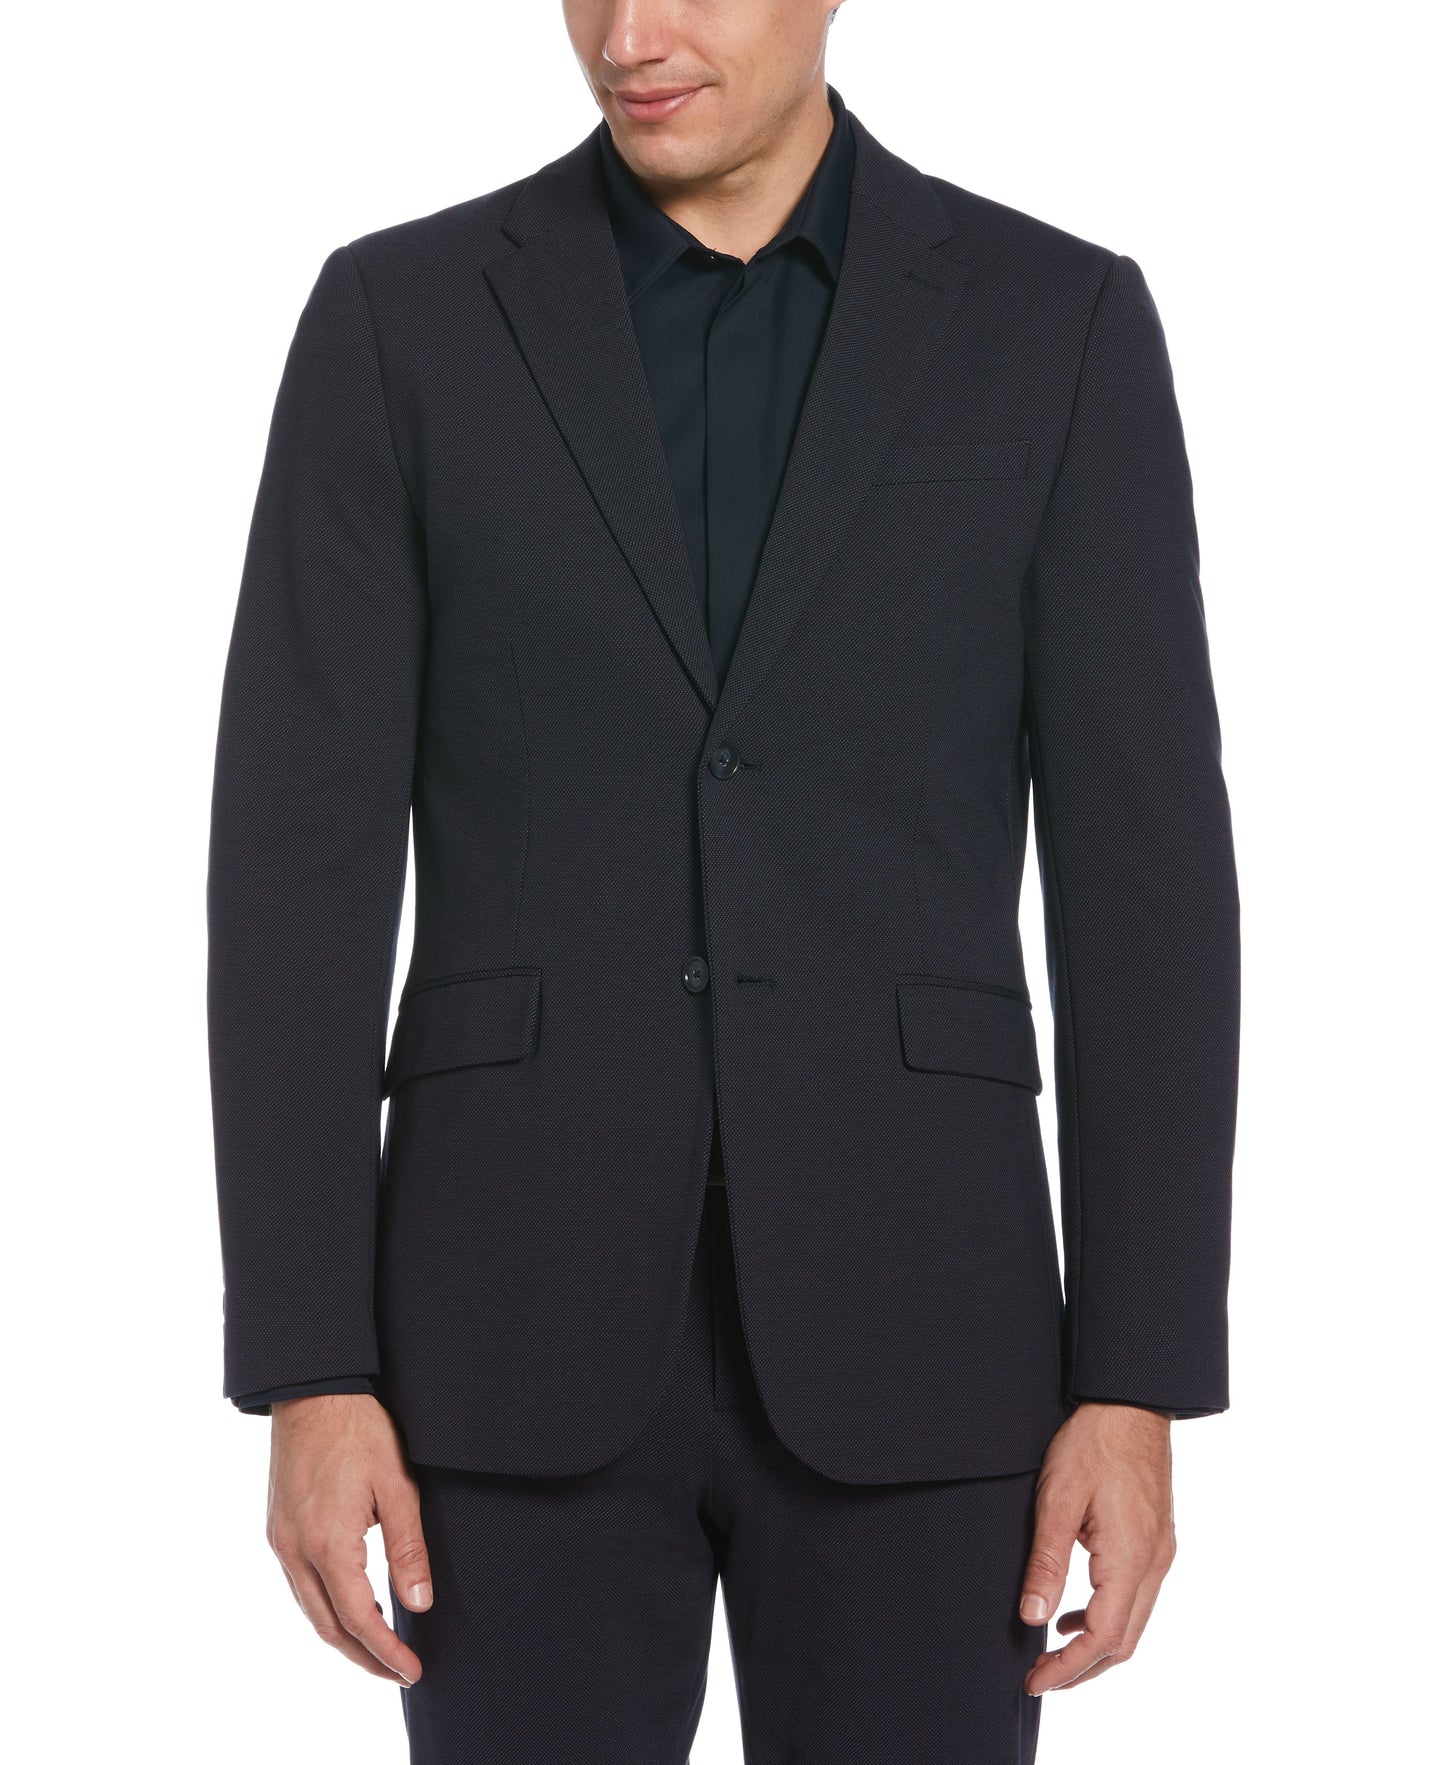 Very Slim Fit Textured Stretch Knit Suit